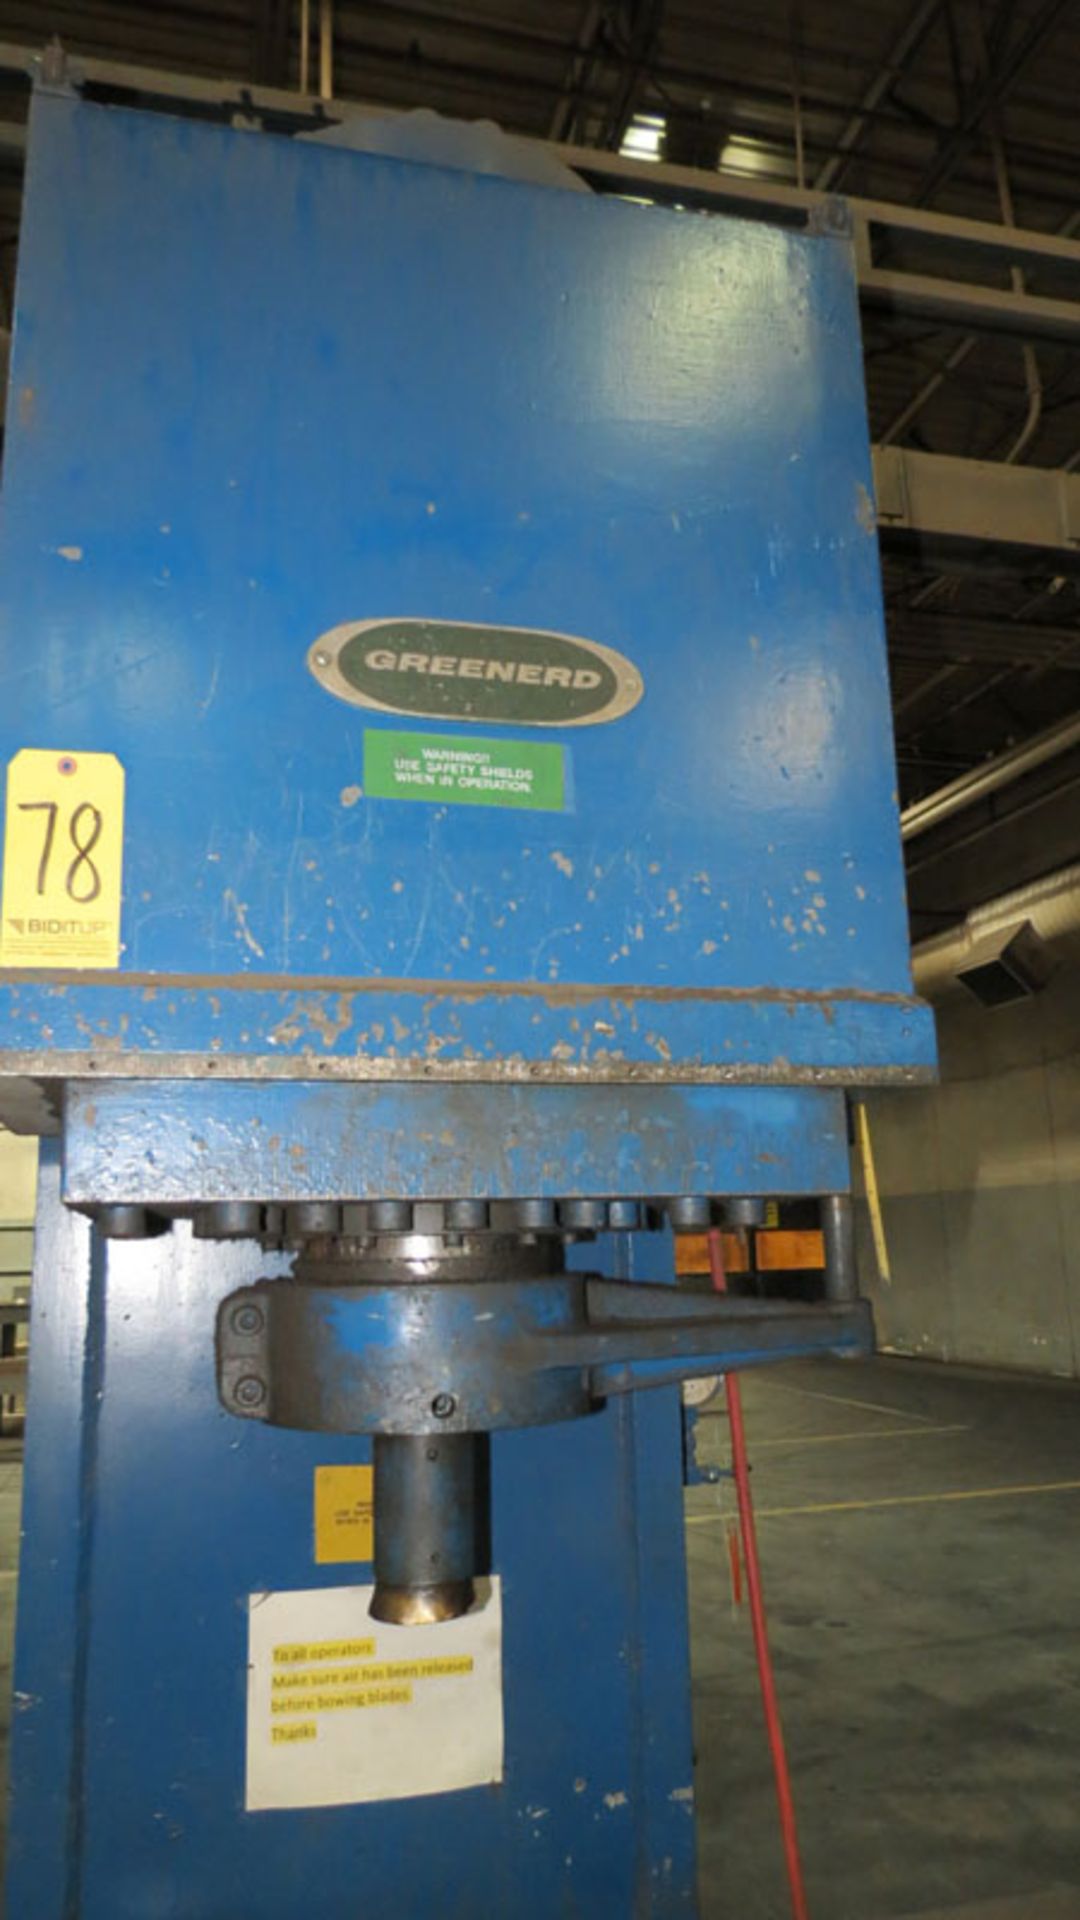 125-Ton Greenerd Hydraulic C-Frame Press, Mdl. 4-125-50L17, S/N: 71T3040, Located in Holland, OH - Image 2 of 5